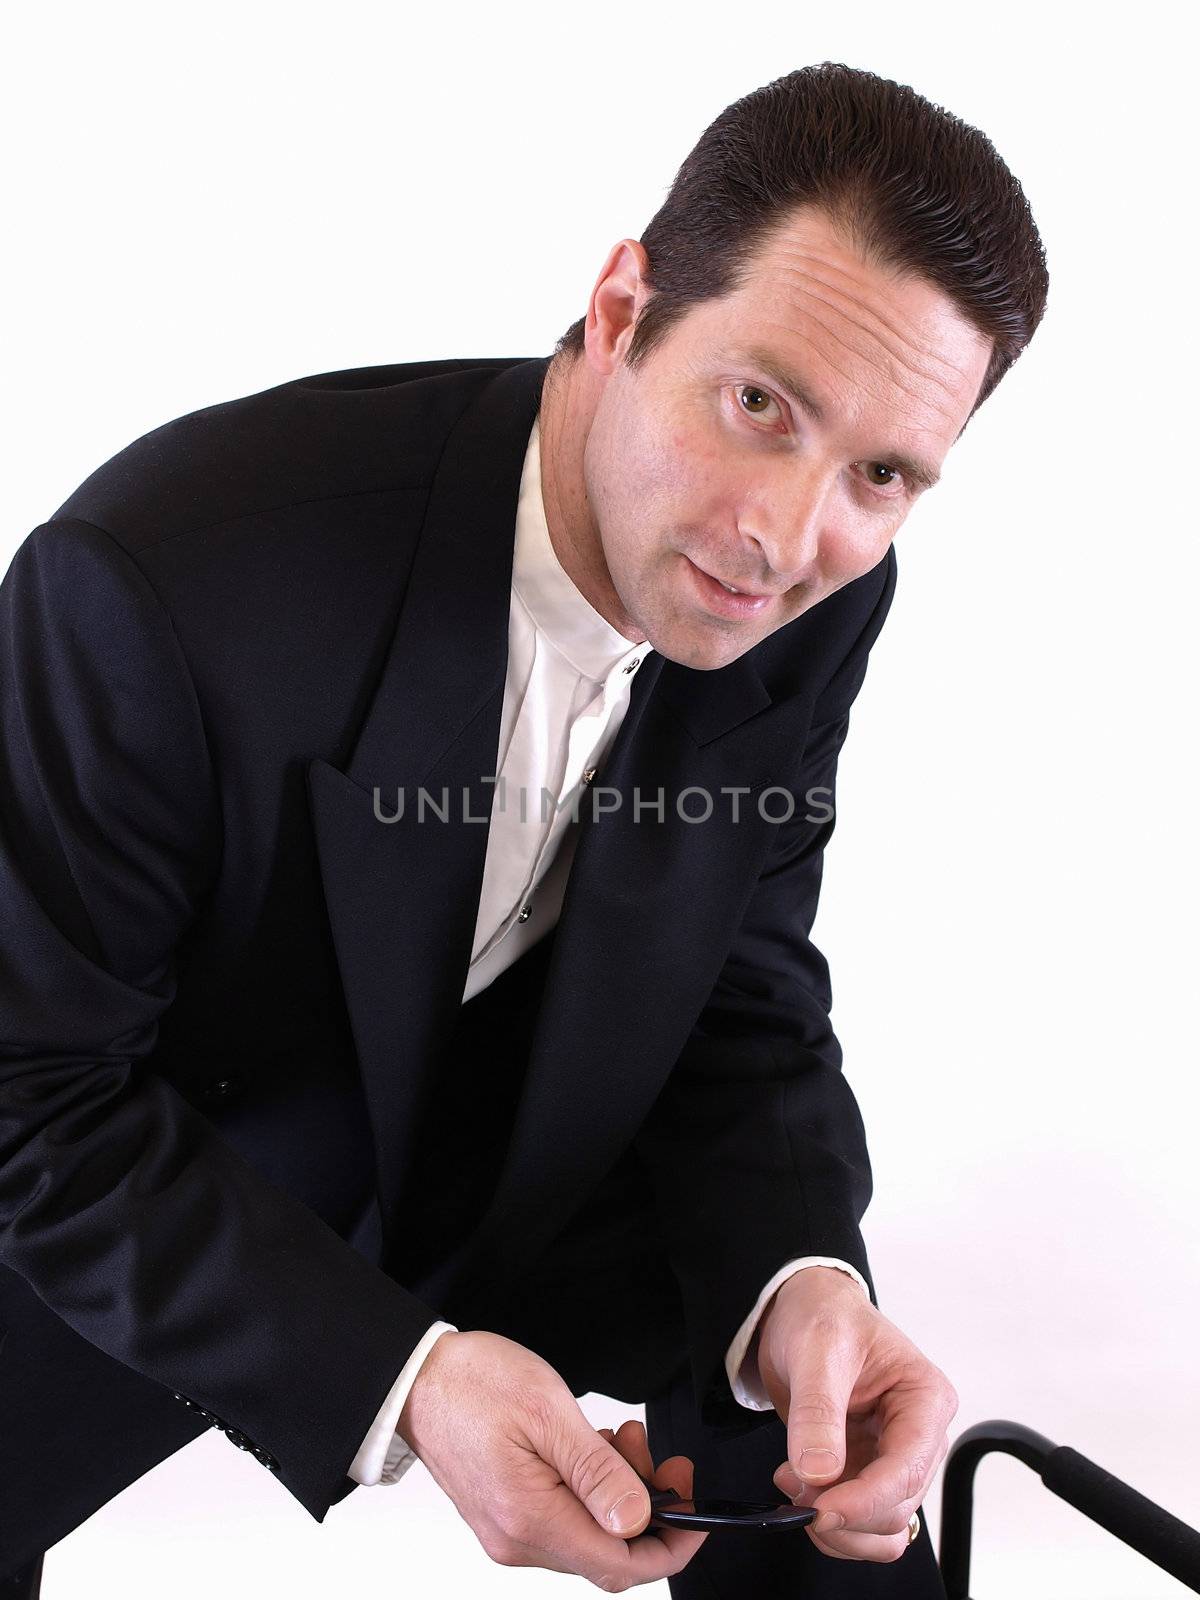 A standing man leans down on one knee to check an incoming text message on his cell phone.